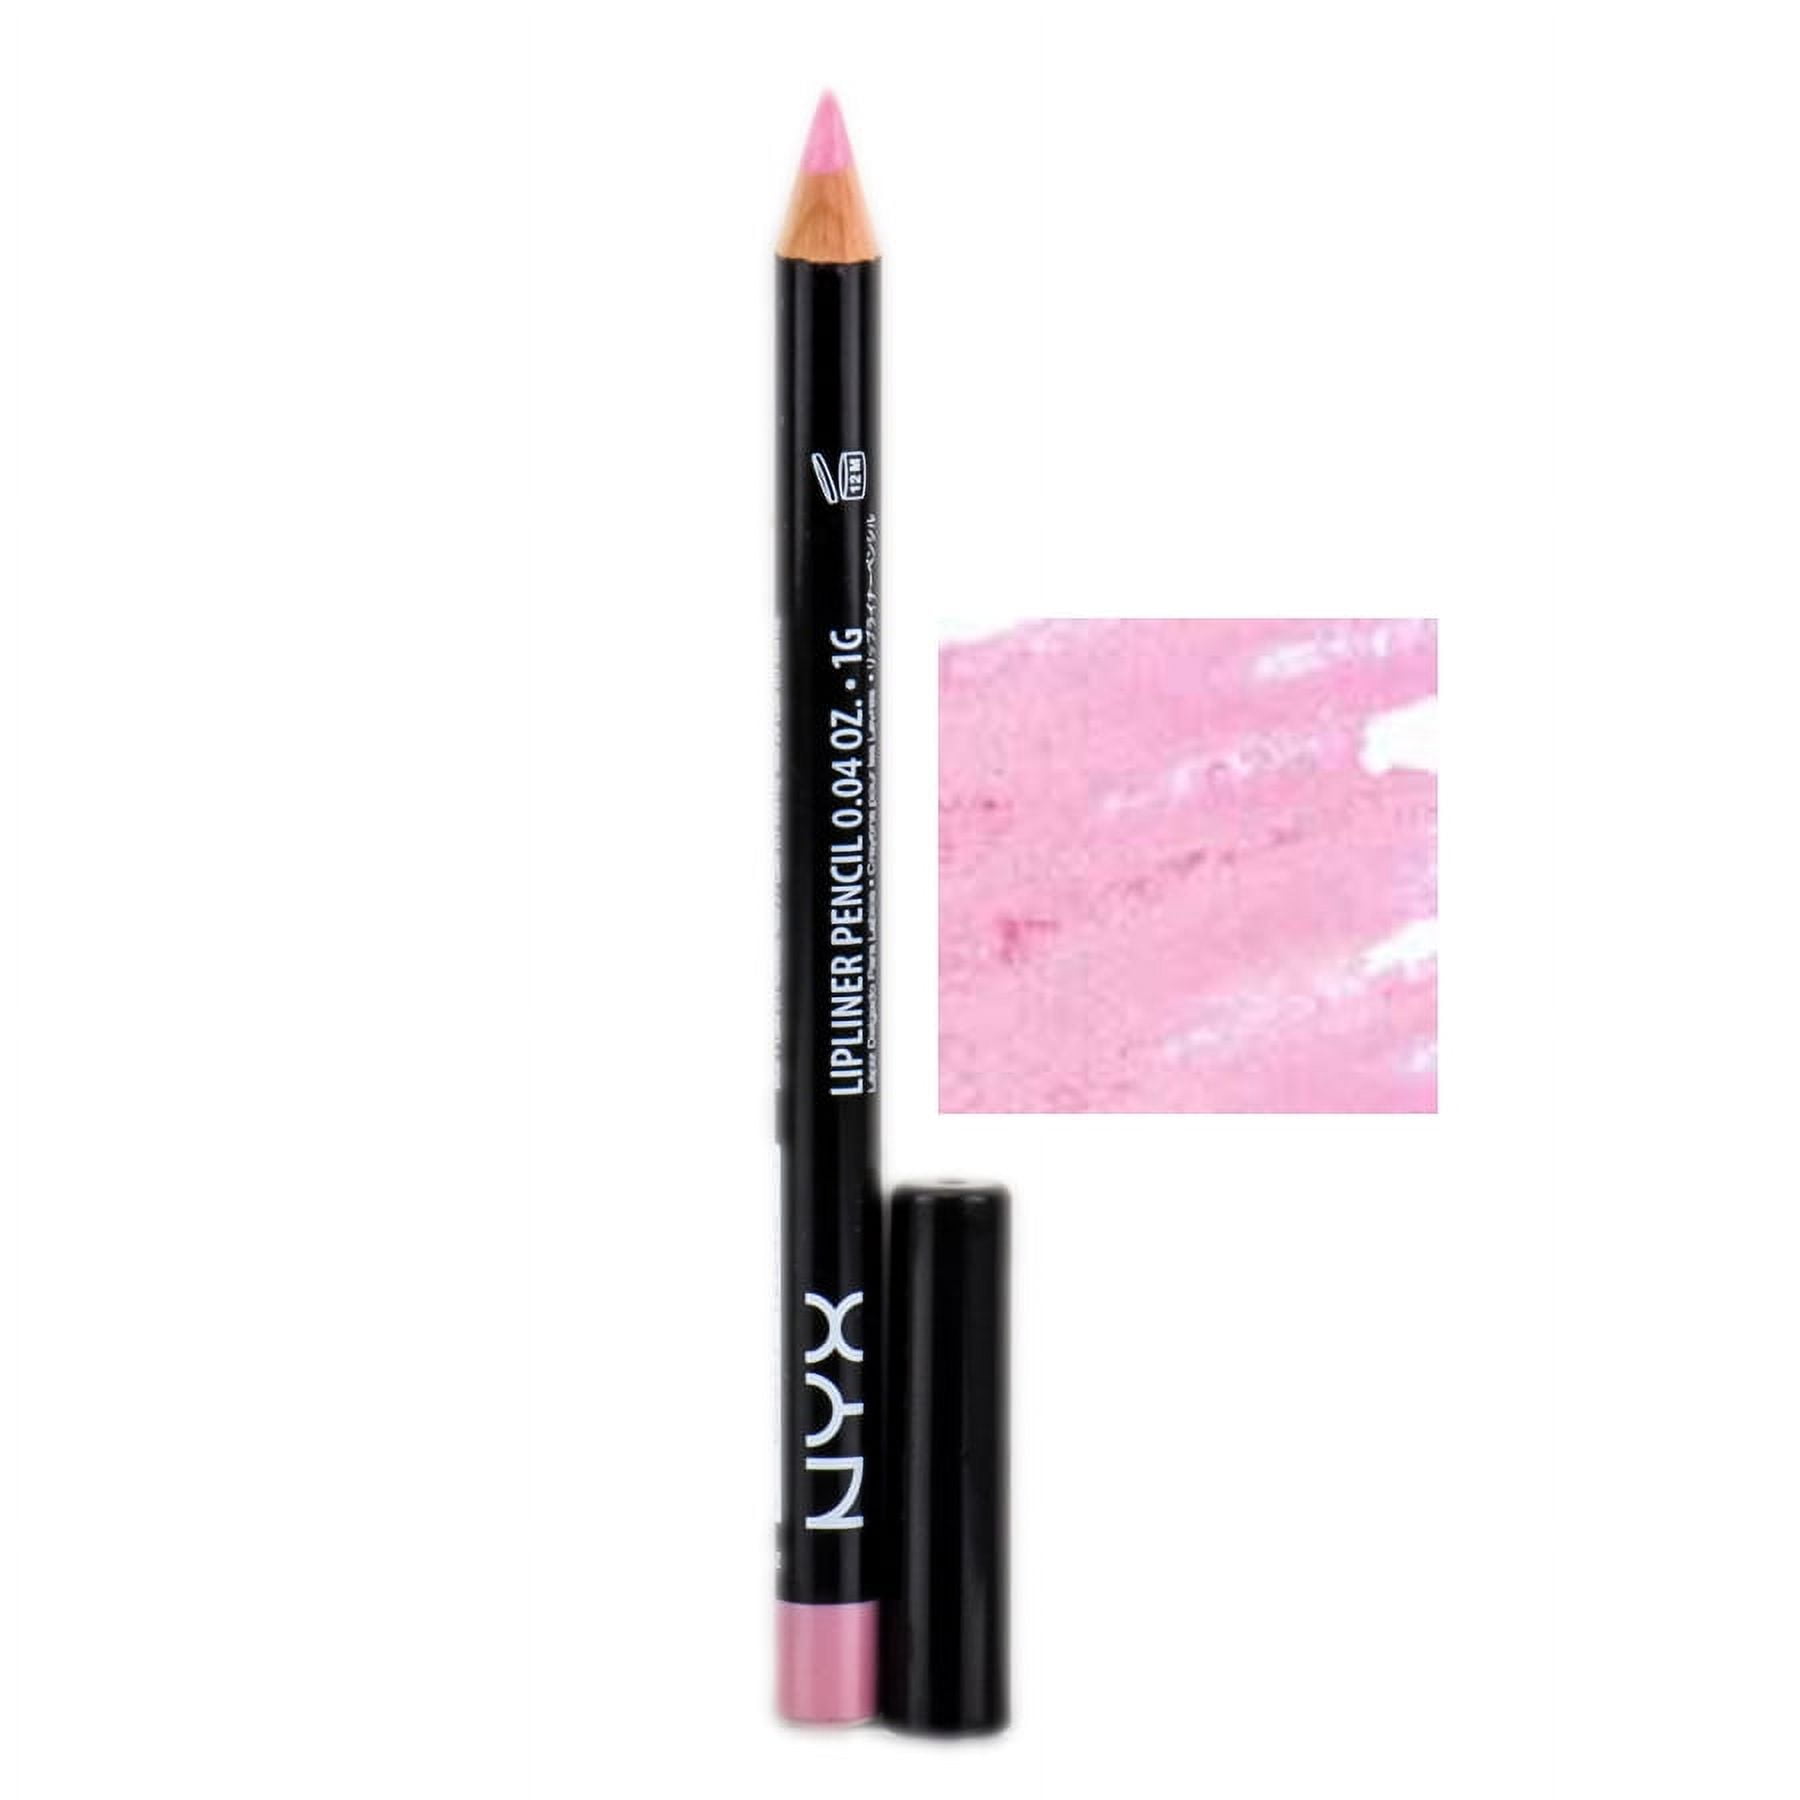 Lot of 6pcs NYX Lipliner Pencil 849 Beige (Made in Germany